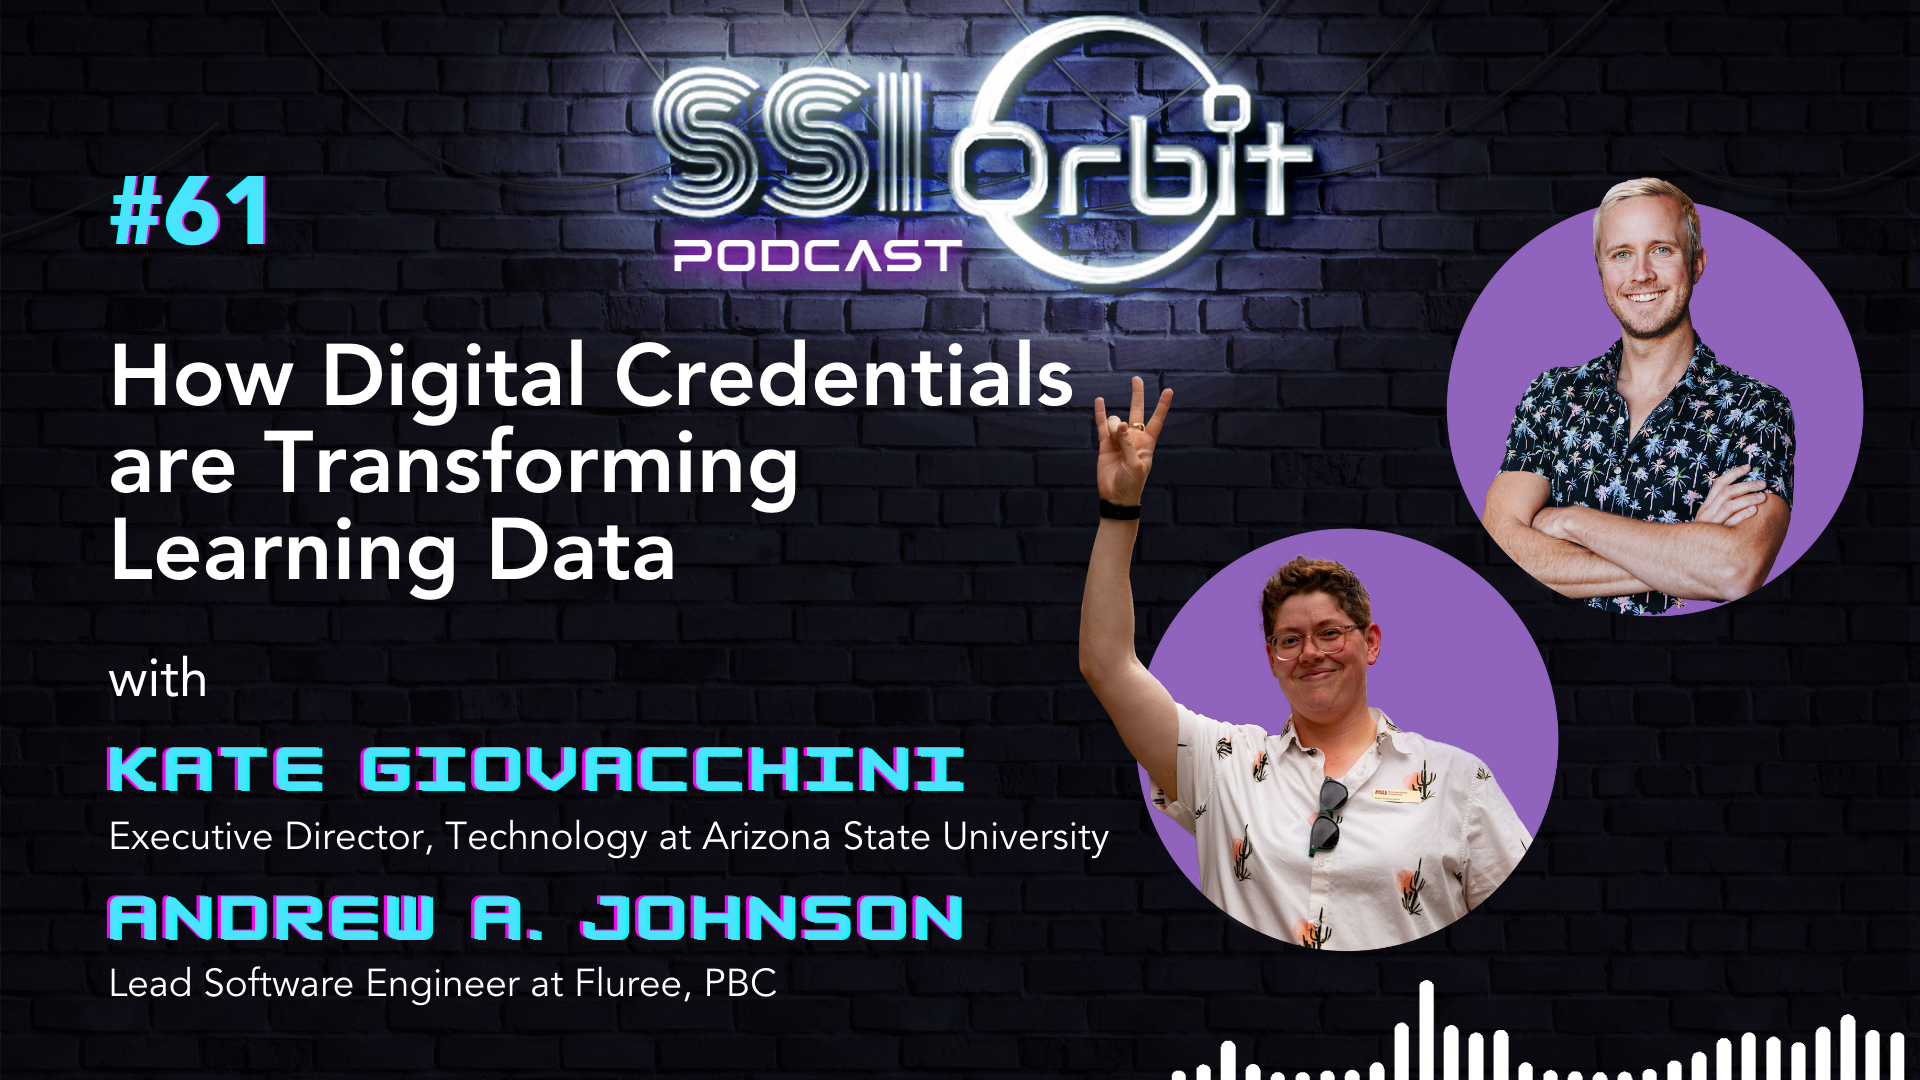 How Digital Credentials are Transforming Learning Data (with Kate Giovacchini & Andrew A. Johnson)